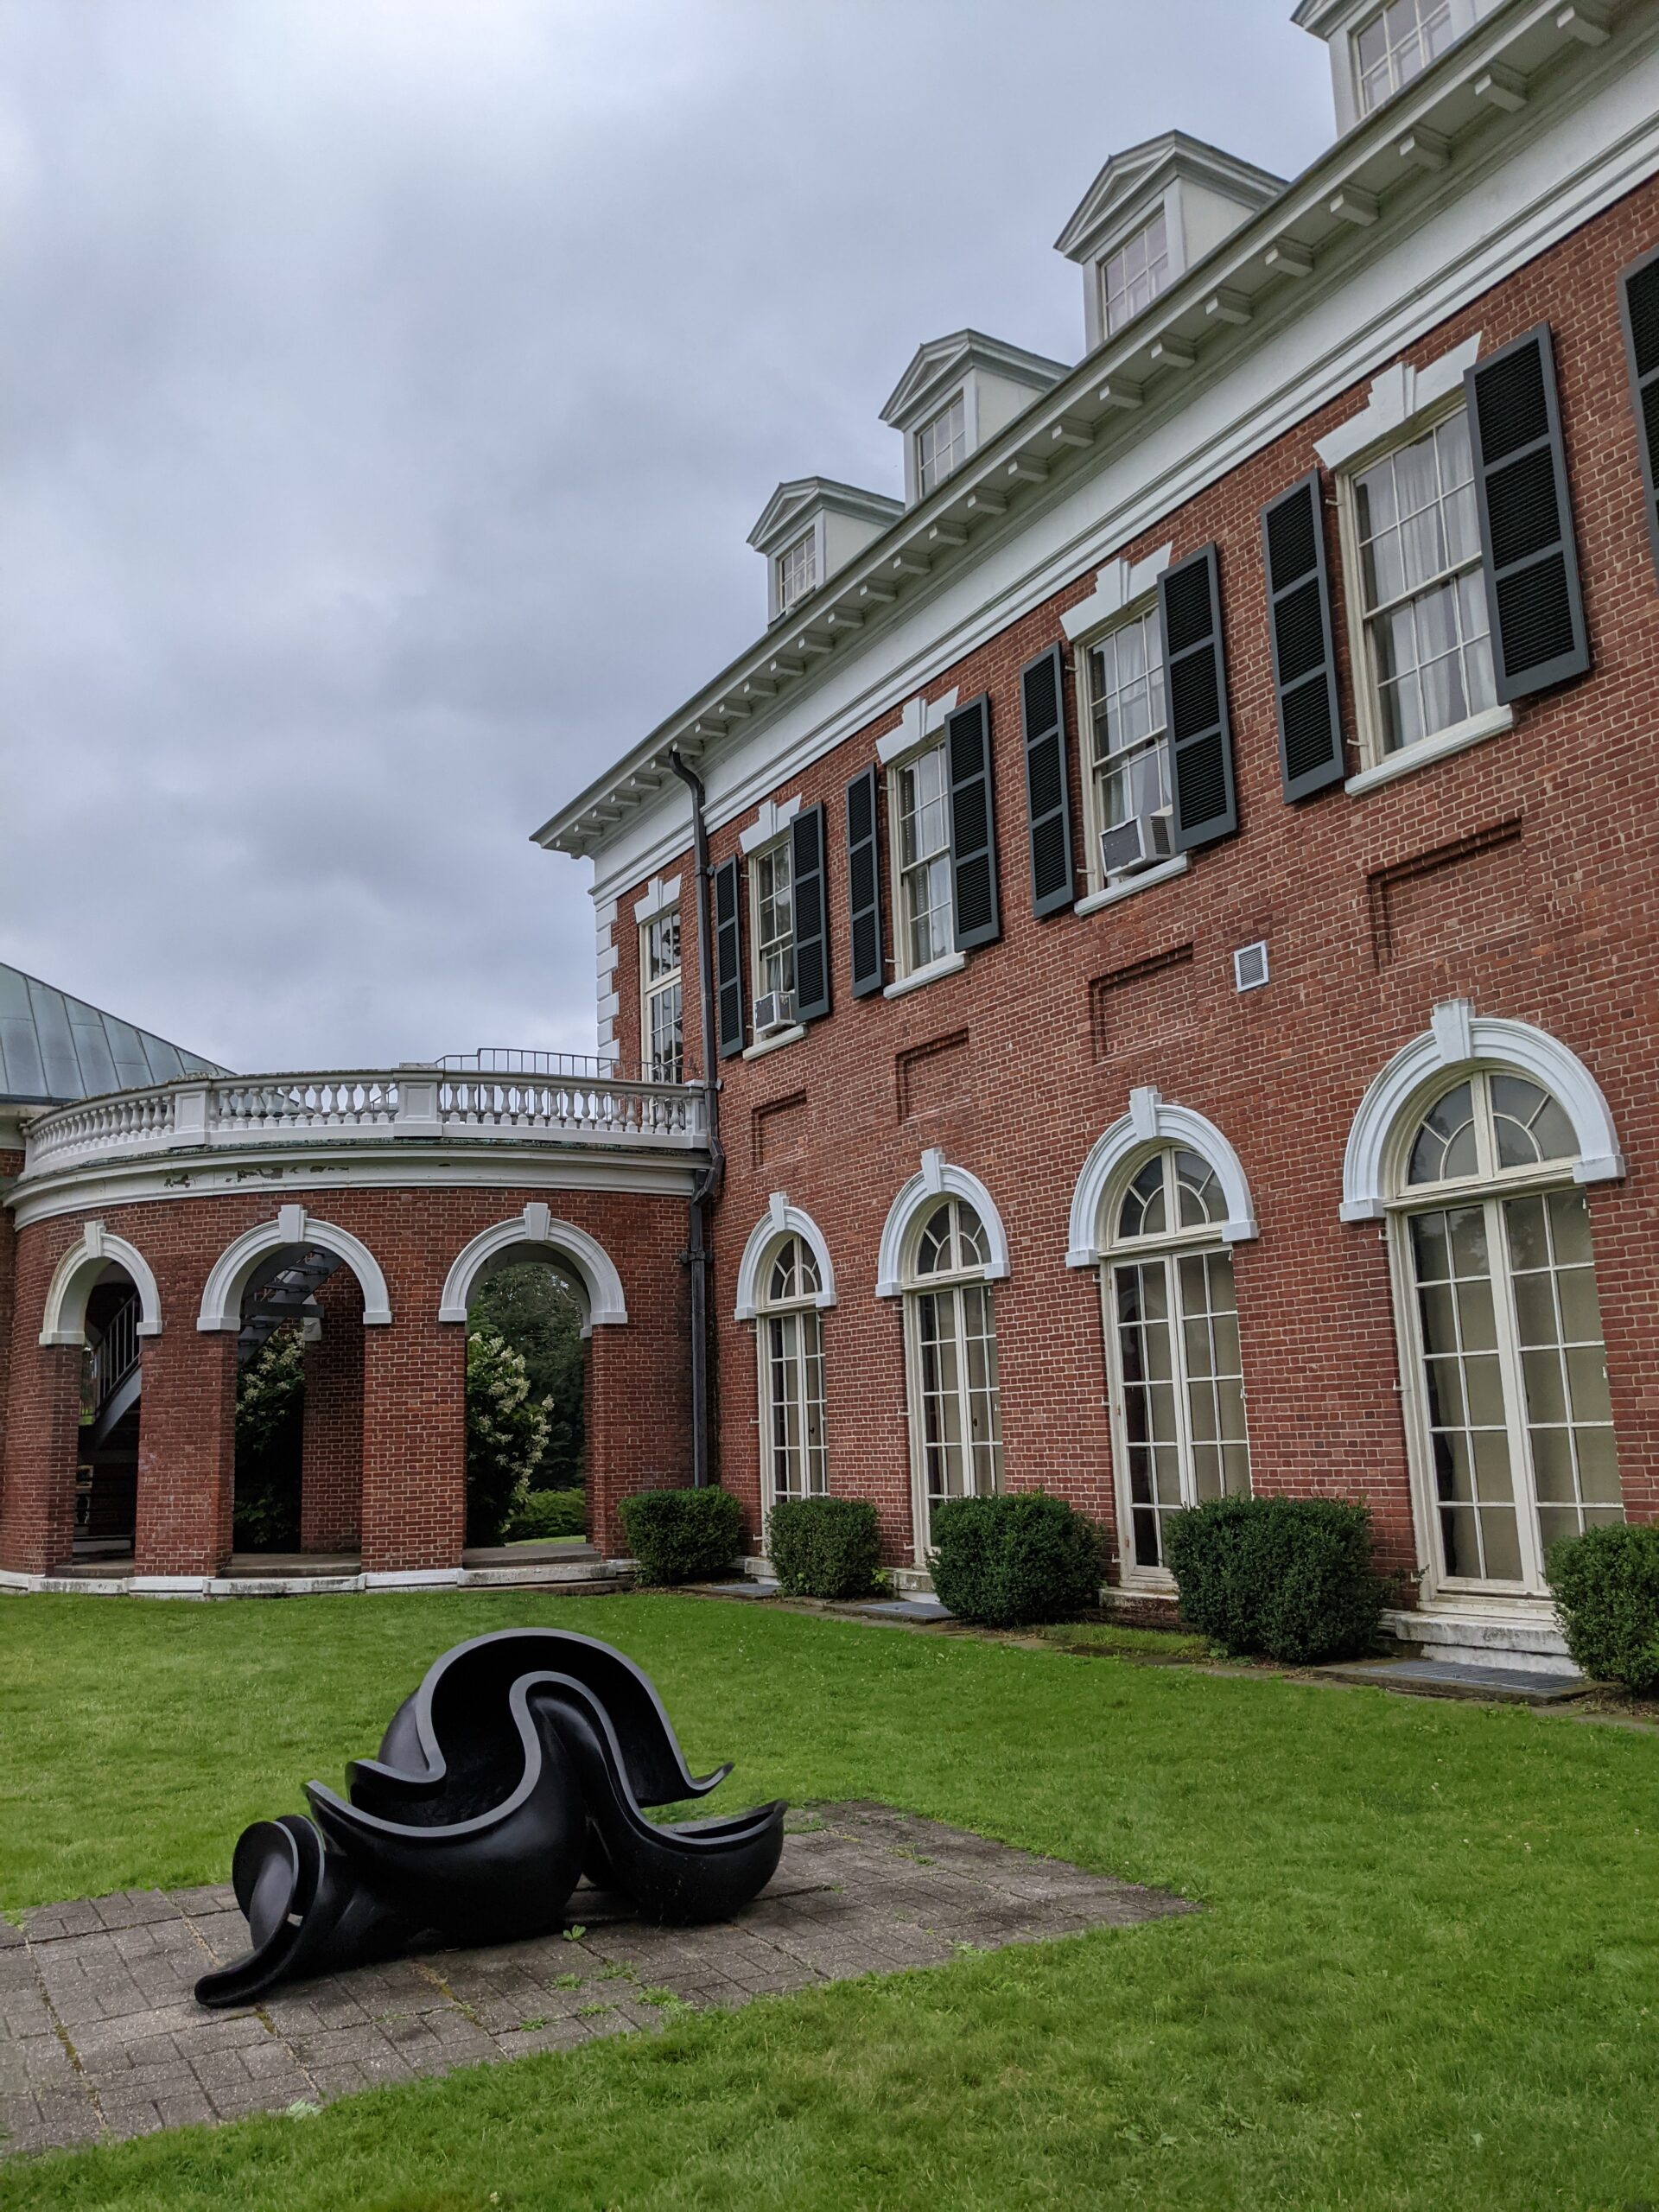 nassau county museum and some art sculpture